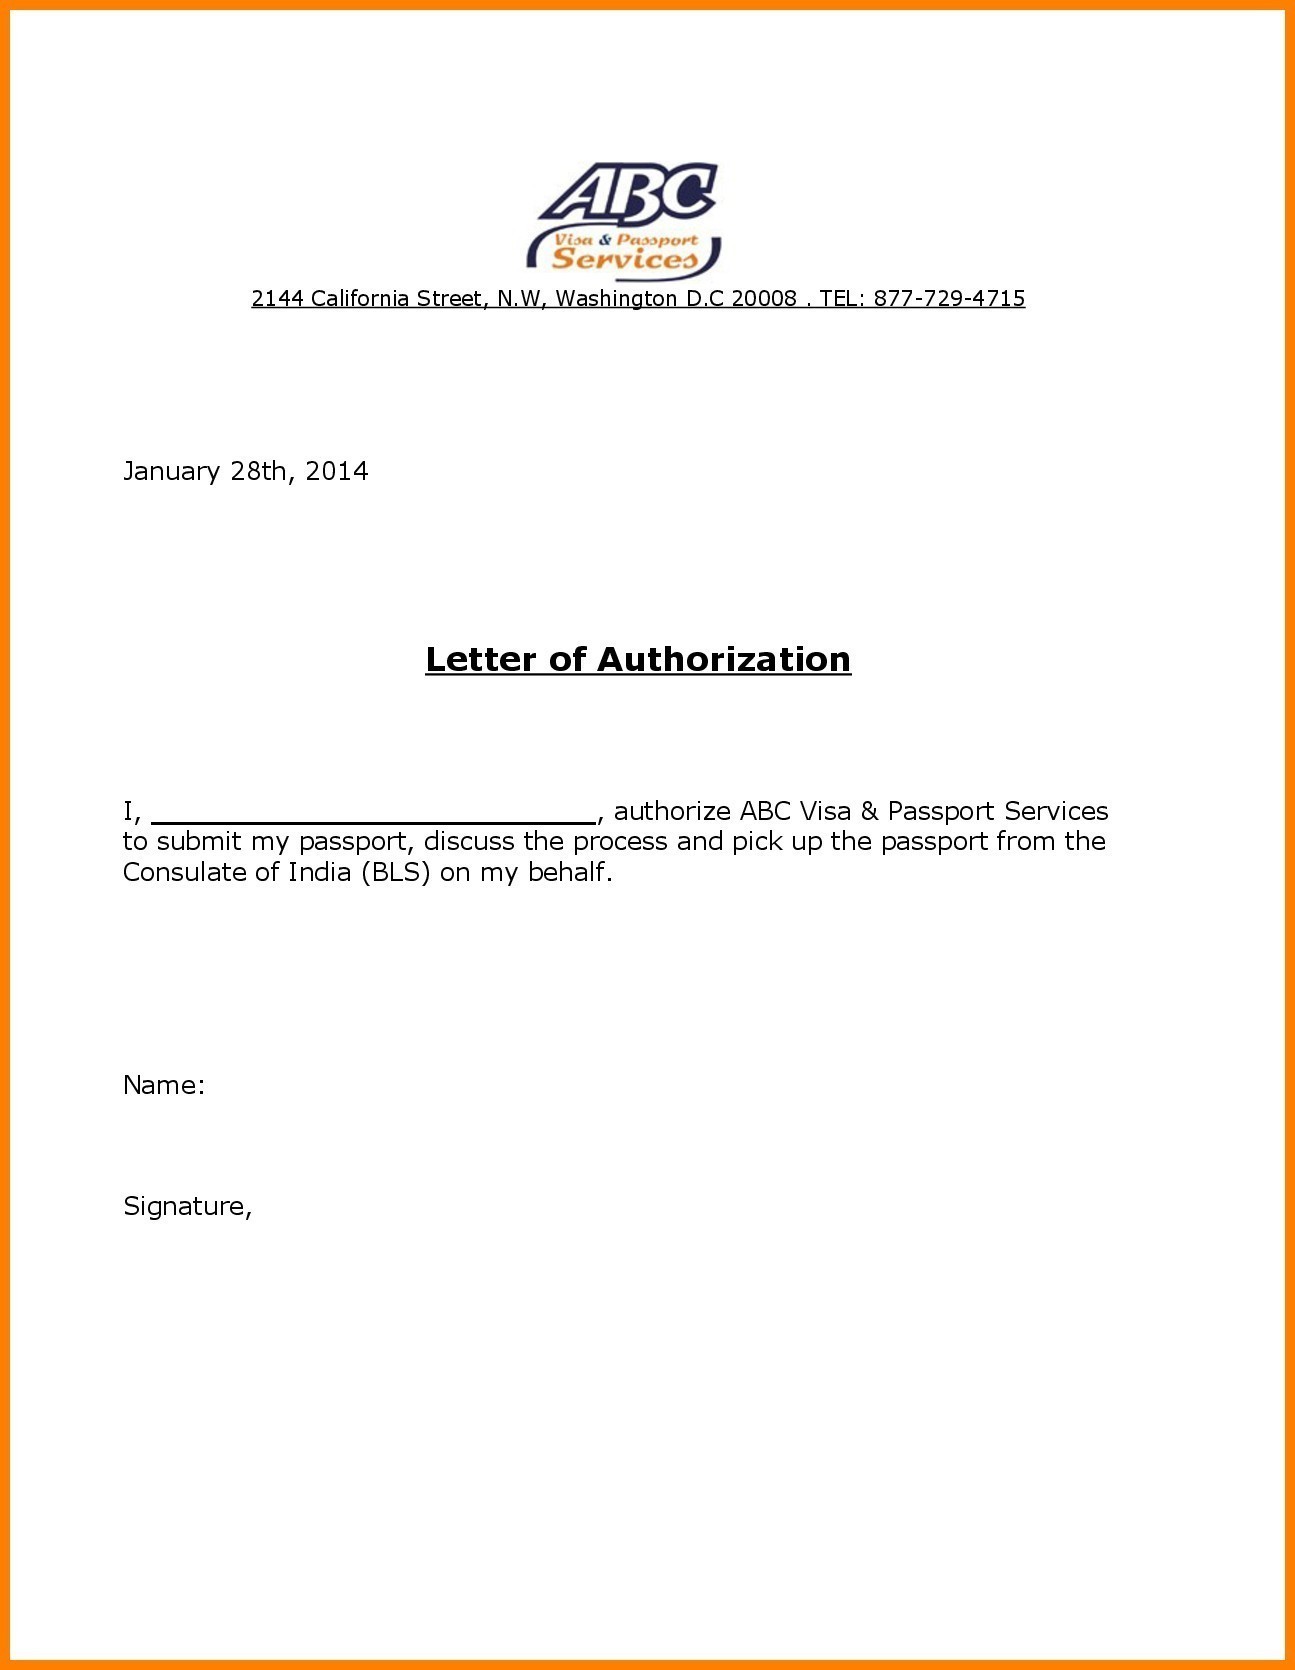 Authorization Letter Sample | Business Mentor